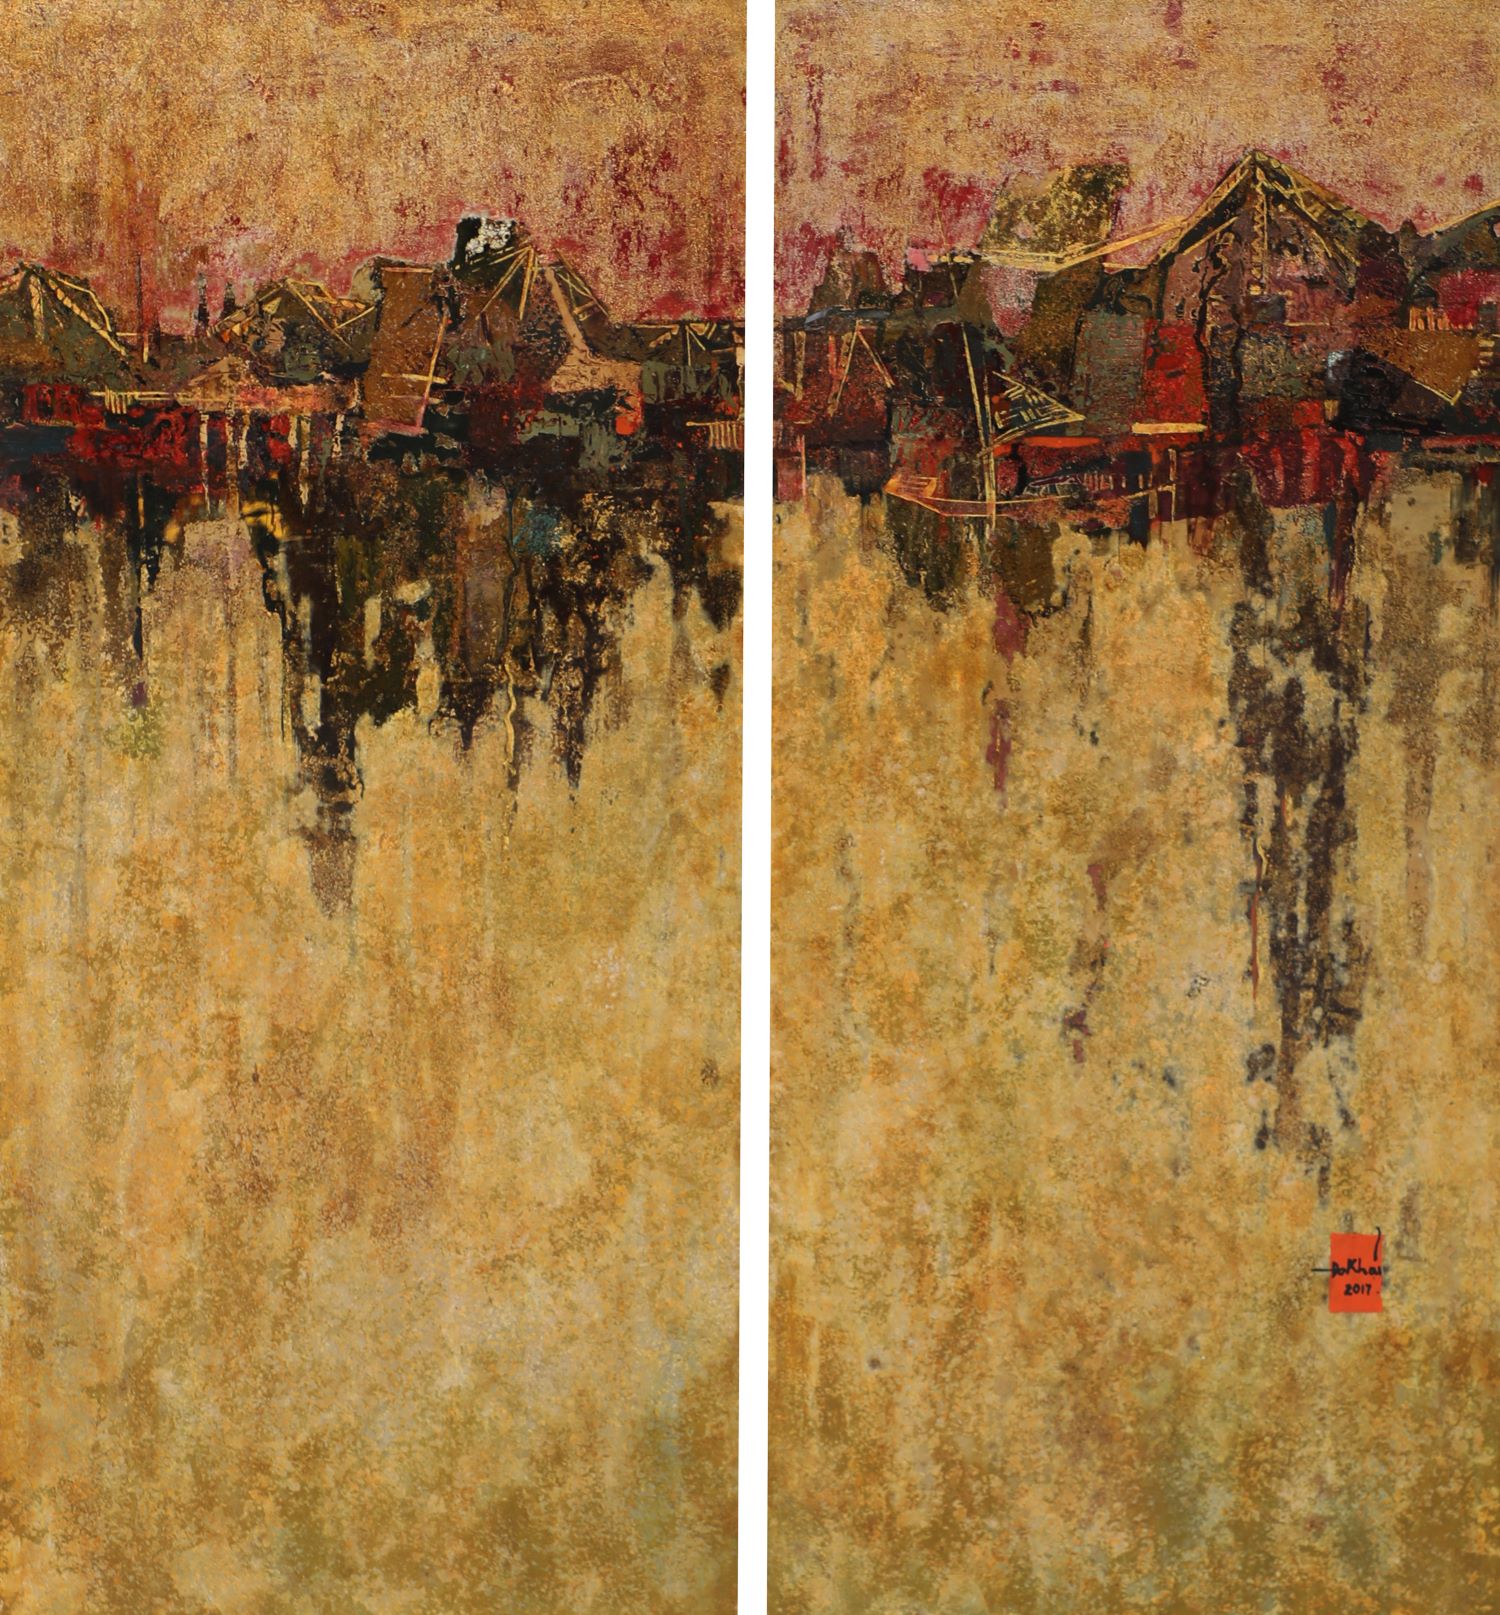 Improvisation at Red River - Vietnamese Lacquer Painting by Artist Do Khai